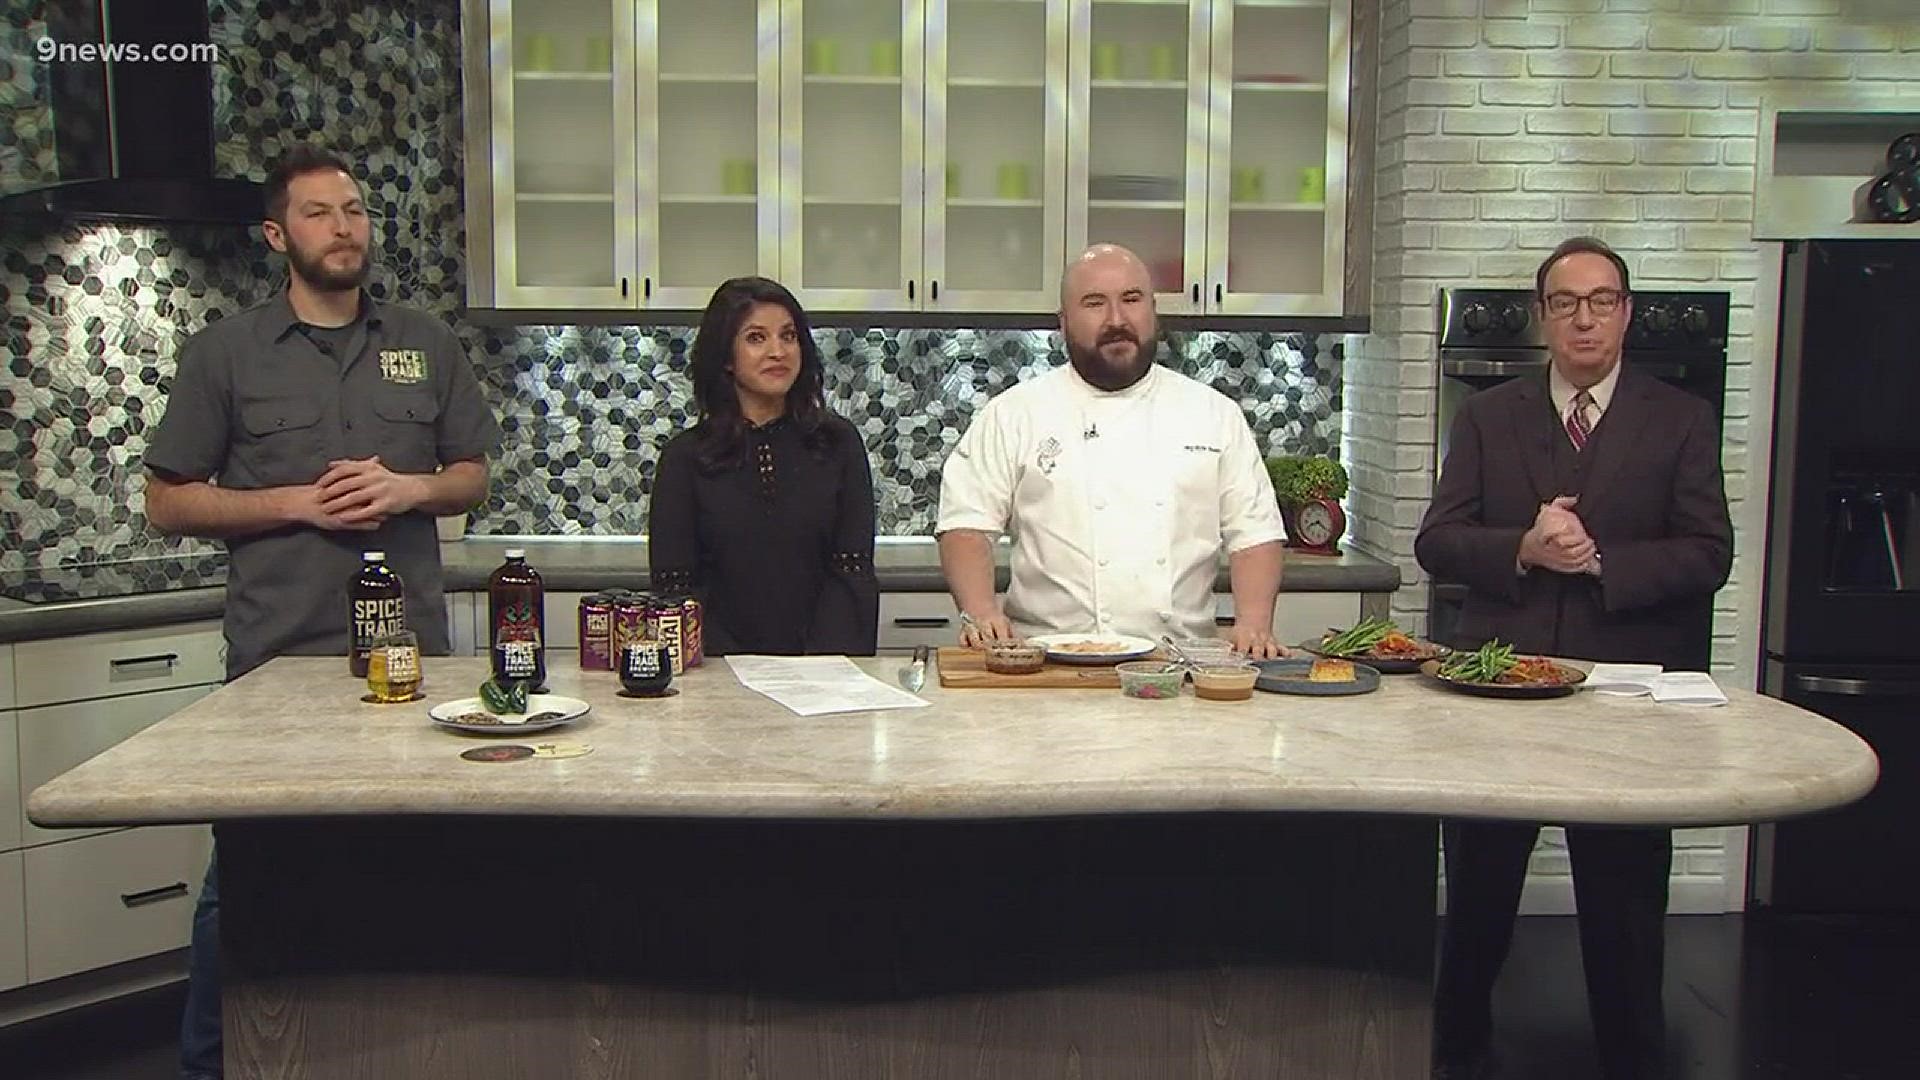 Las Delicias and Spice Trade Brewing stopped by 9NEWS to talk about food and beer pairings as part of Denver Restaurant Week.